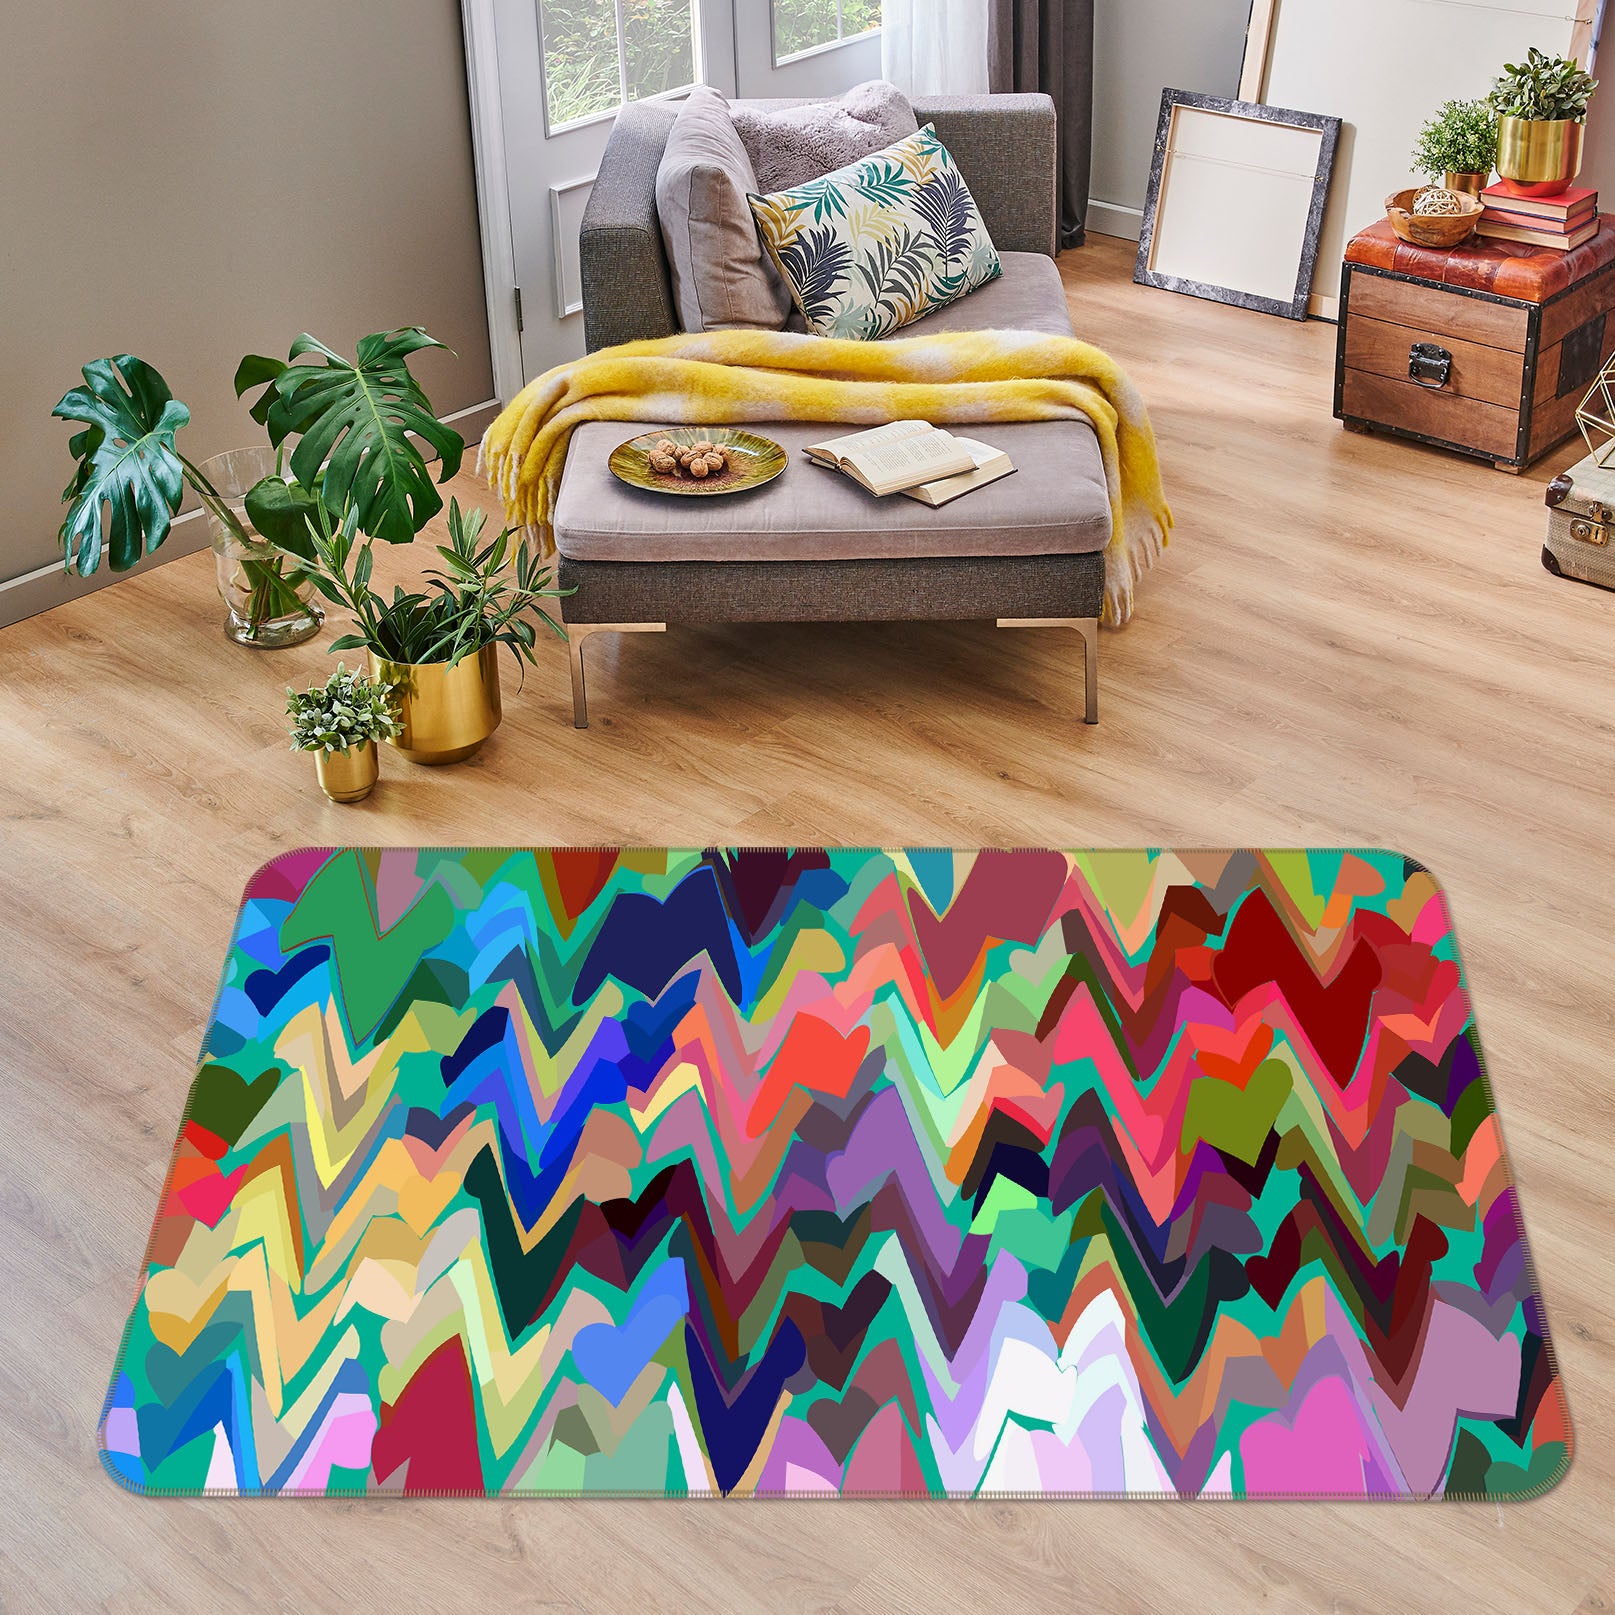 3D Colorful Waves 70060 Shandra Smith Rug Non Slip Rug Mat